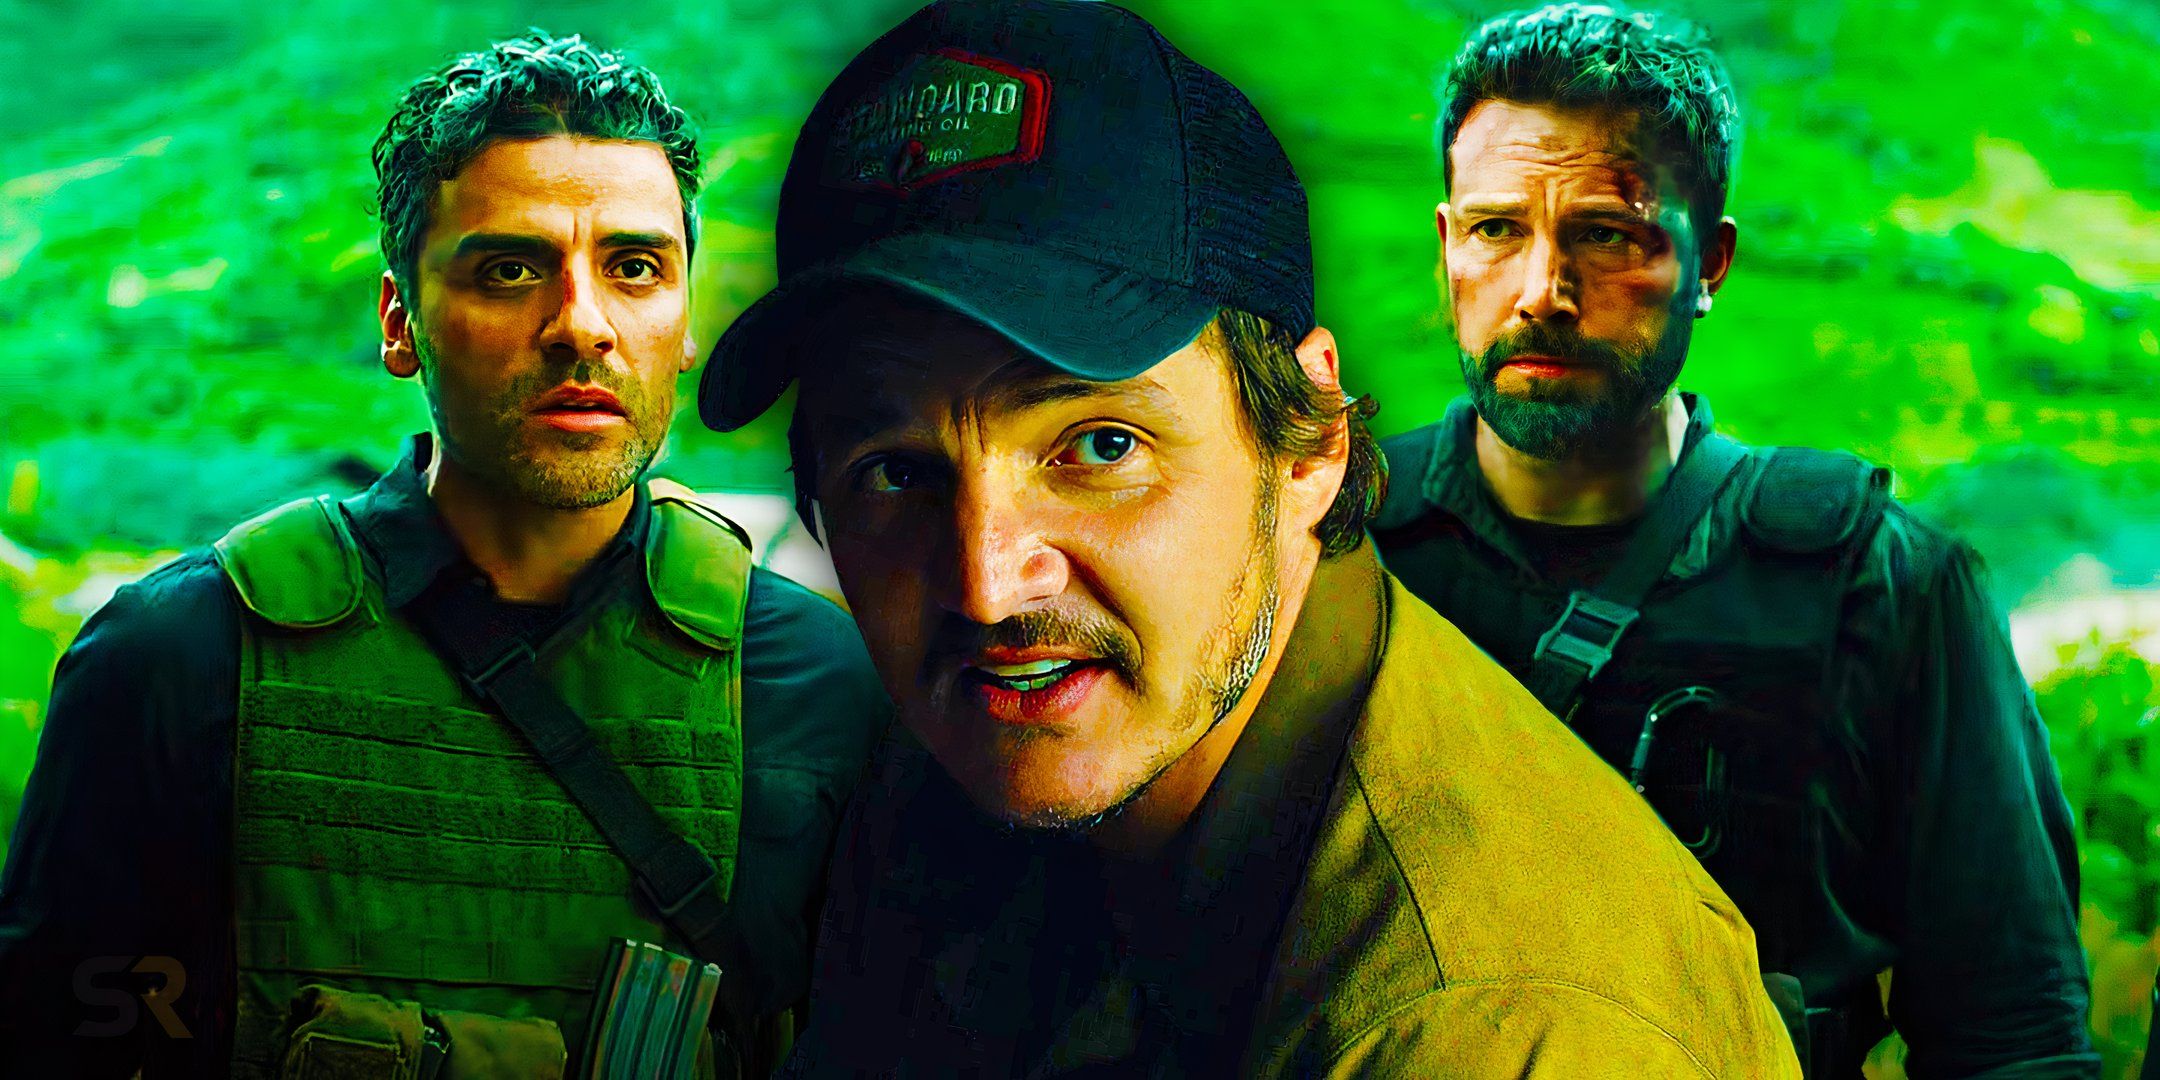 This film starring Ben Affleck, Pedro Pascal and Oscar Isaac is one of Netflix’s most underrated action films